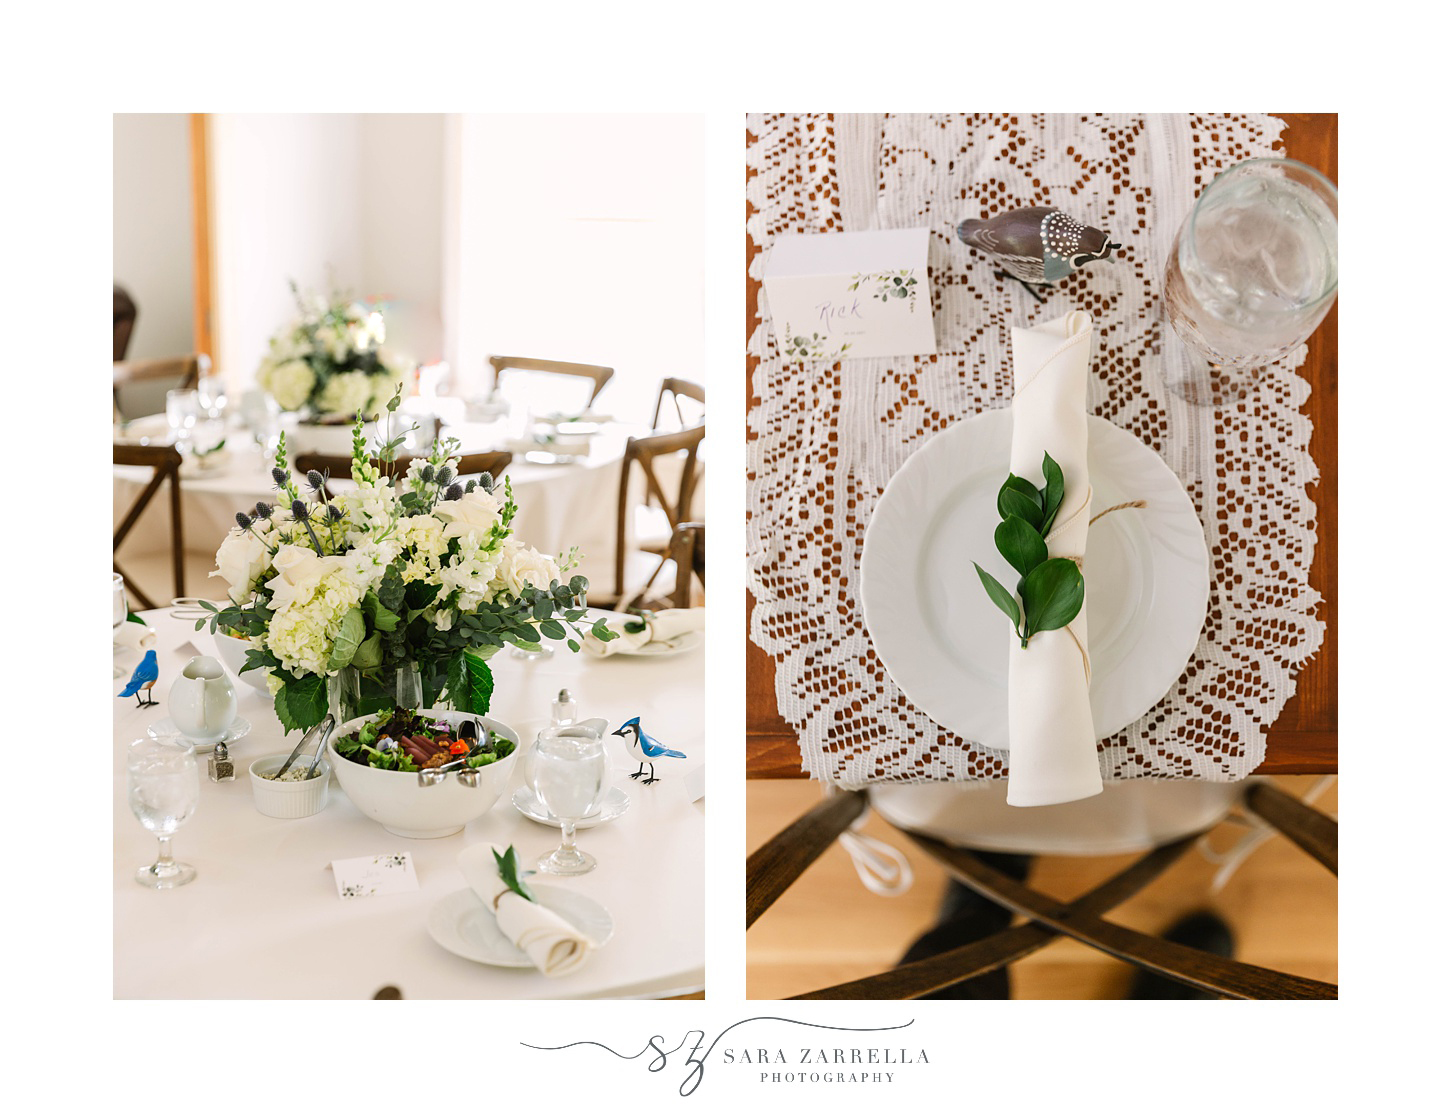 details for intimate elopement reception with lace table settings 